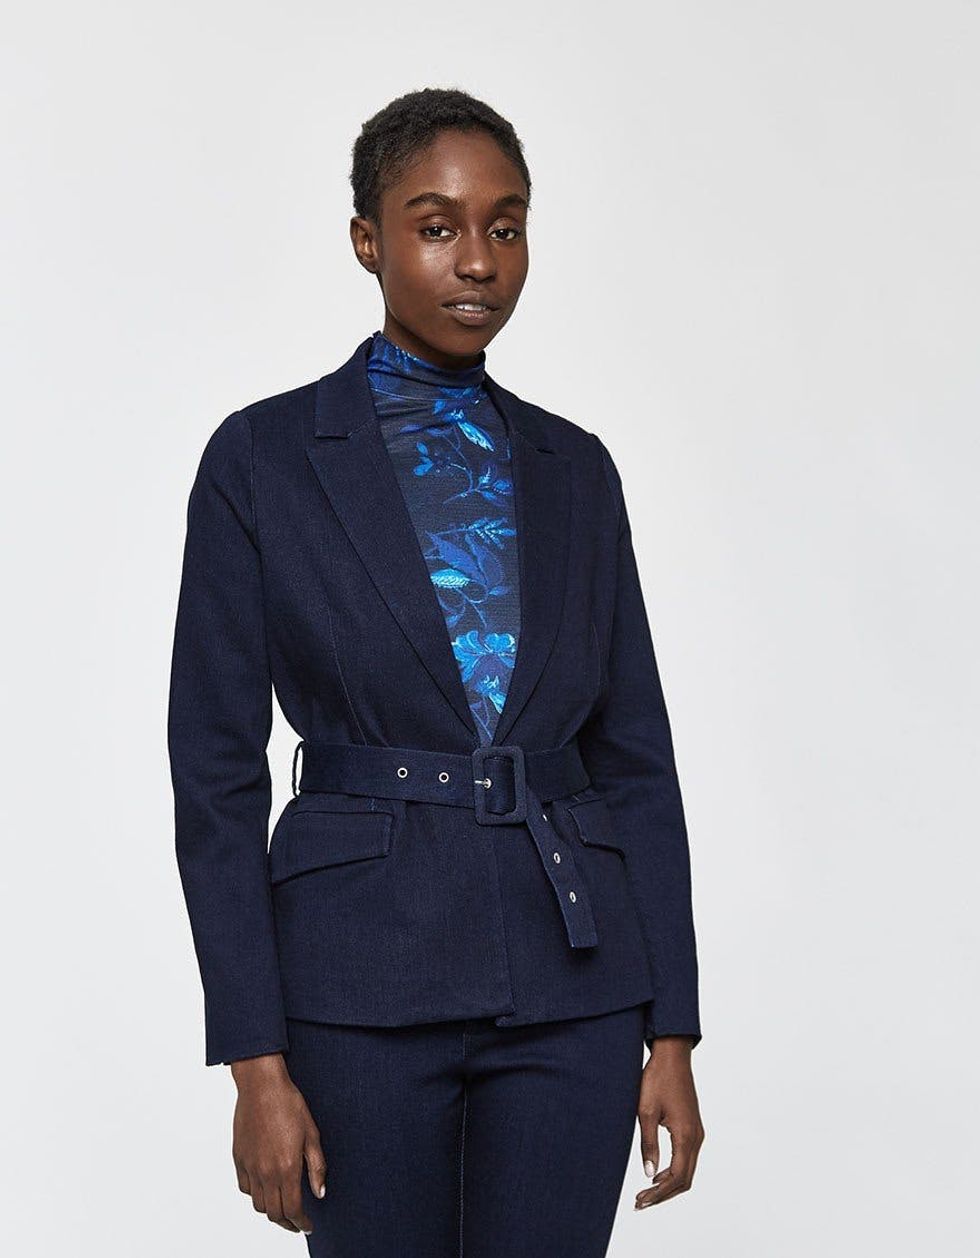 19 Belted Blazers That Werk for Work and Beyond - Brit + Co